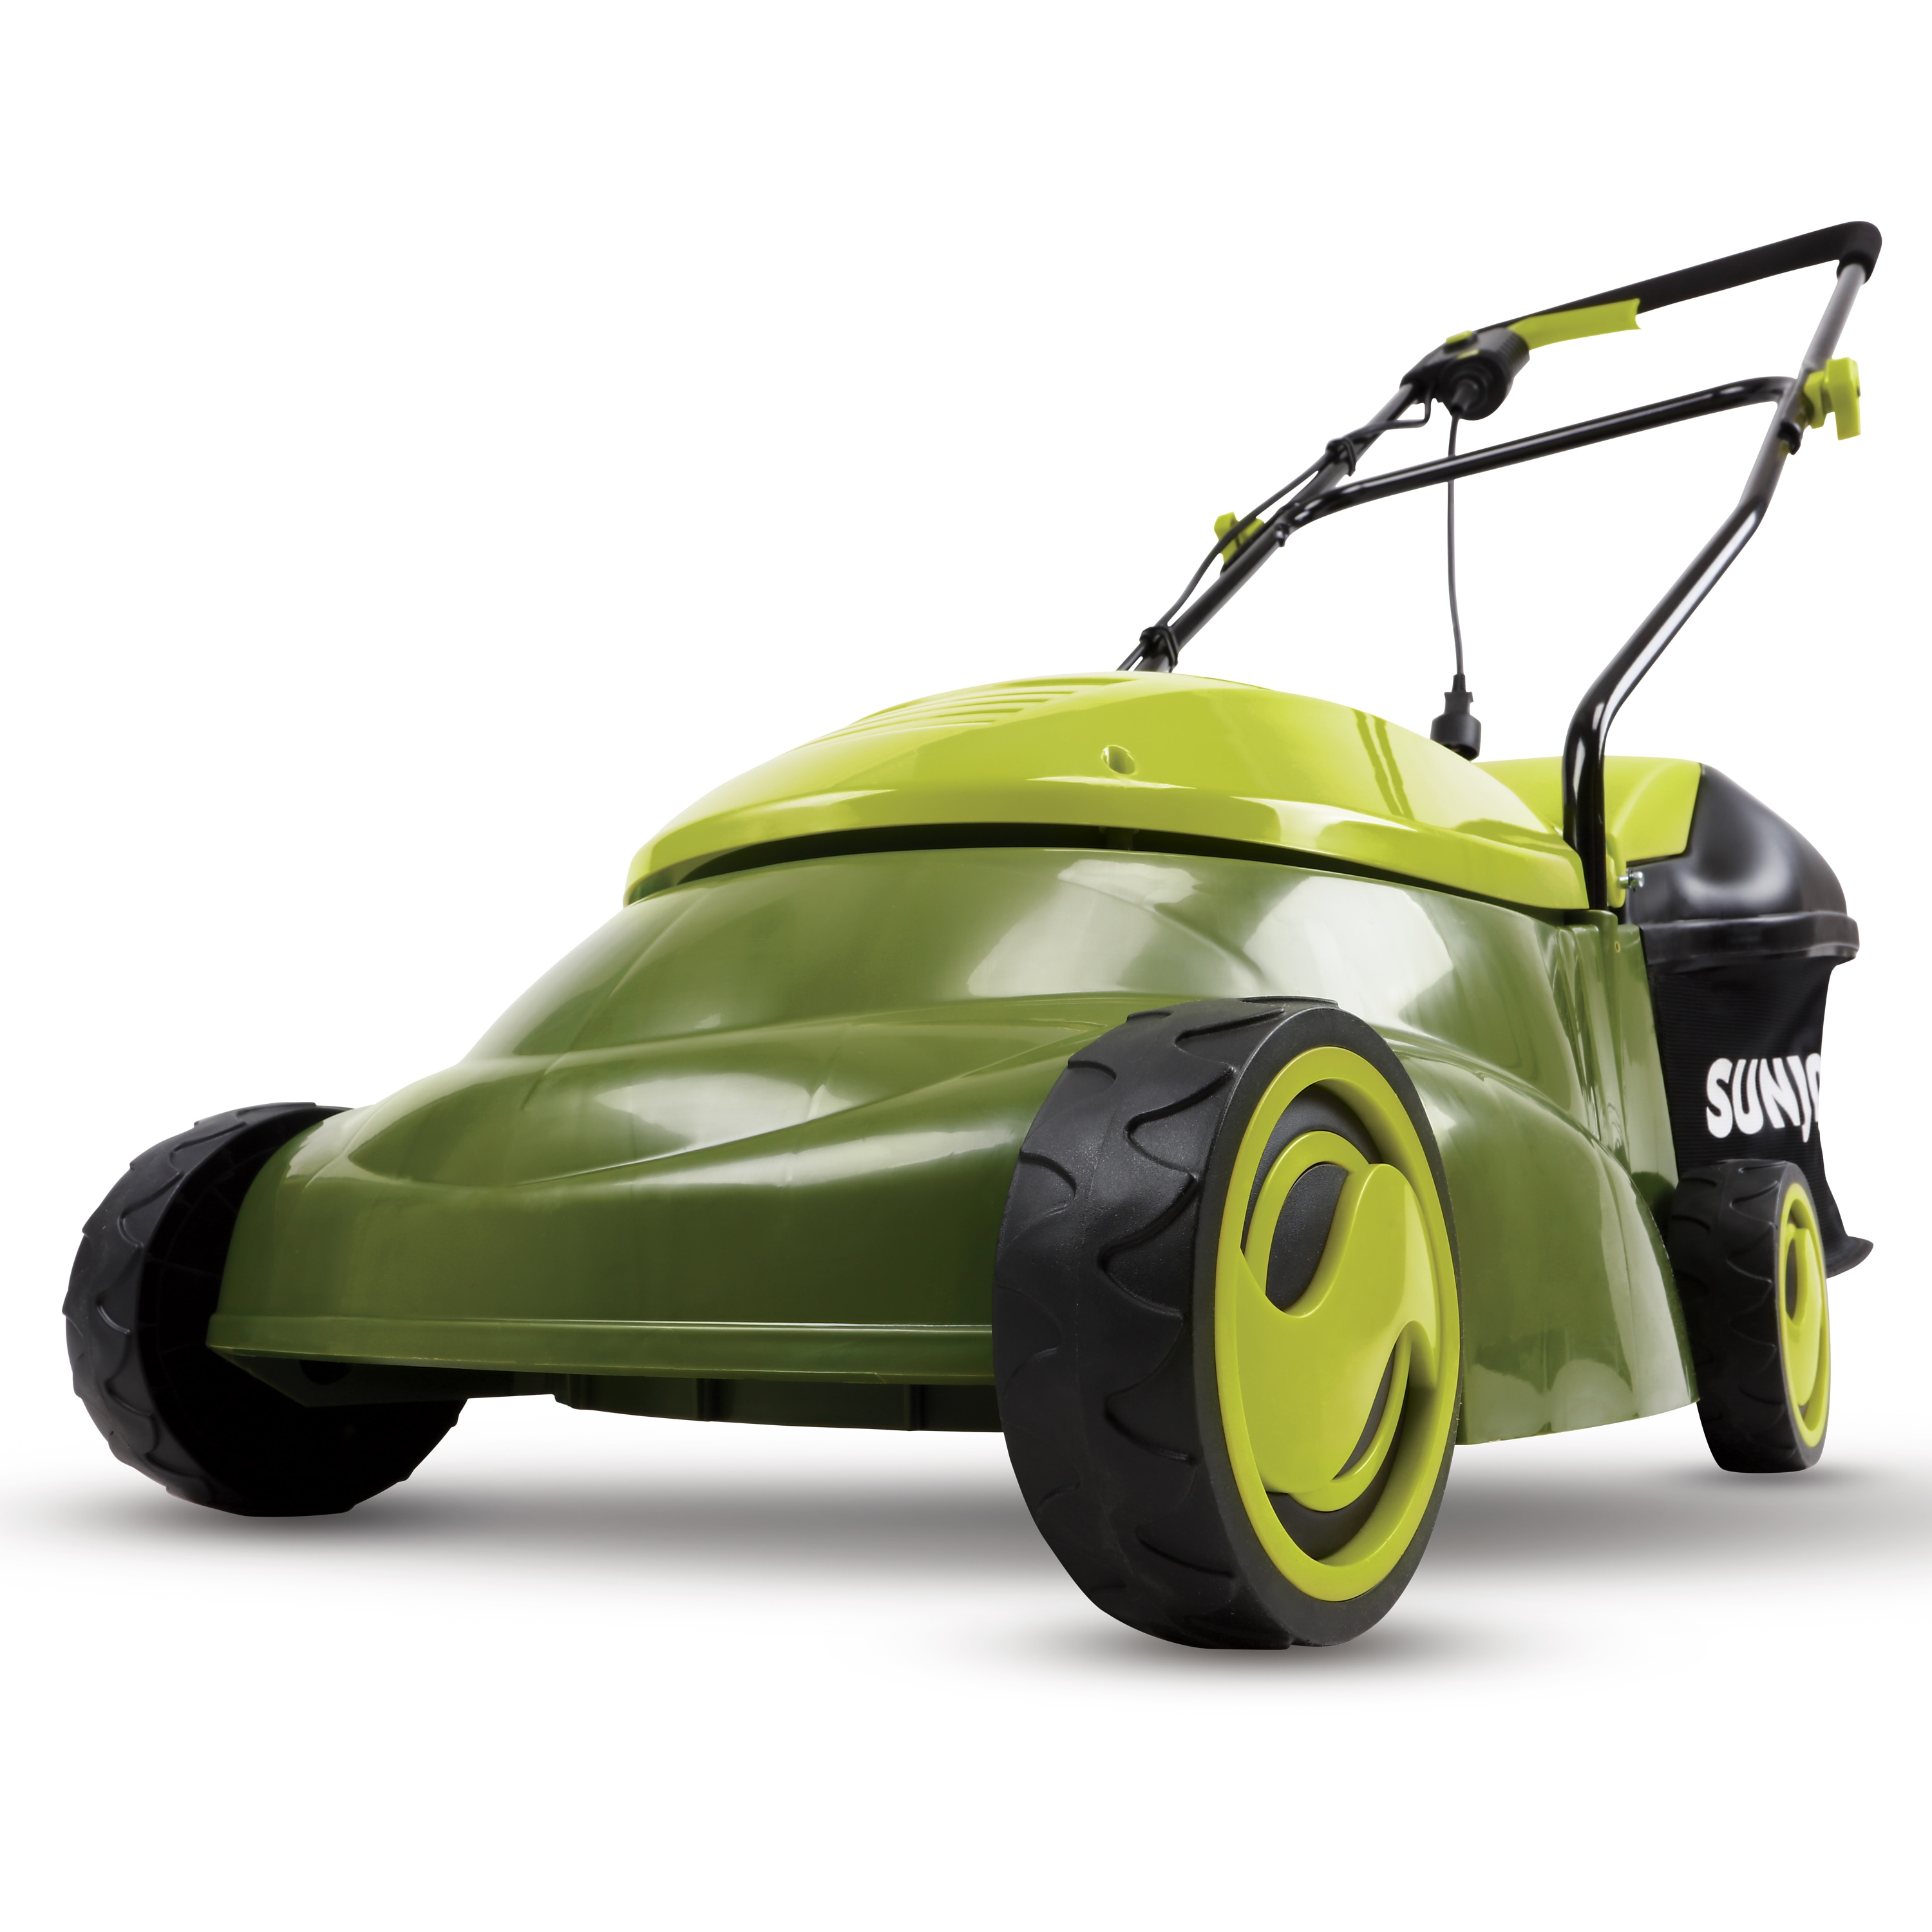 Electric Lawn Mower, 12-Amp, 17-Inch